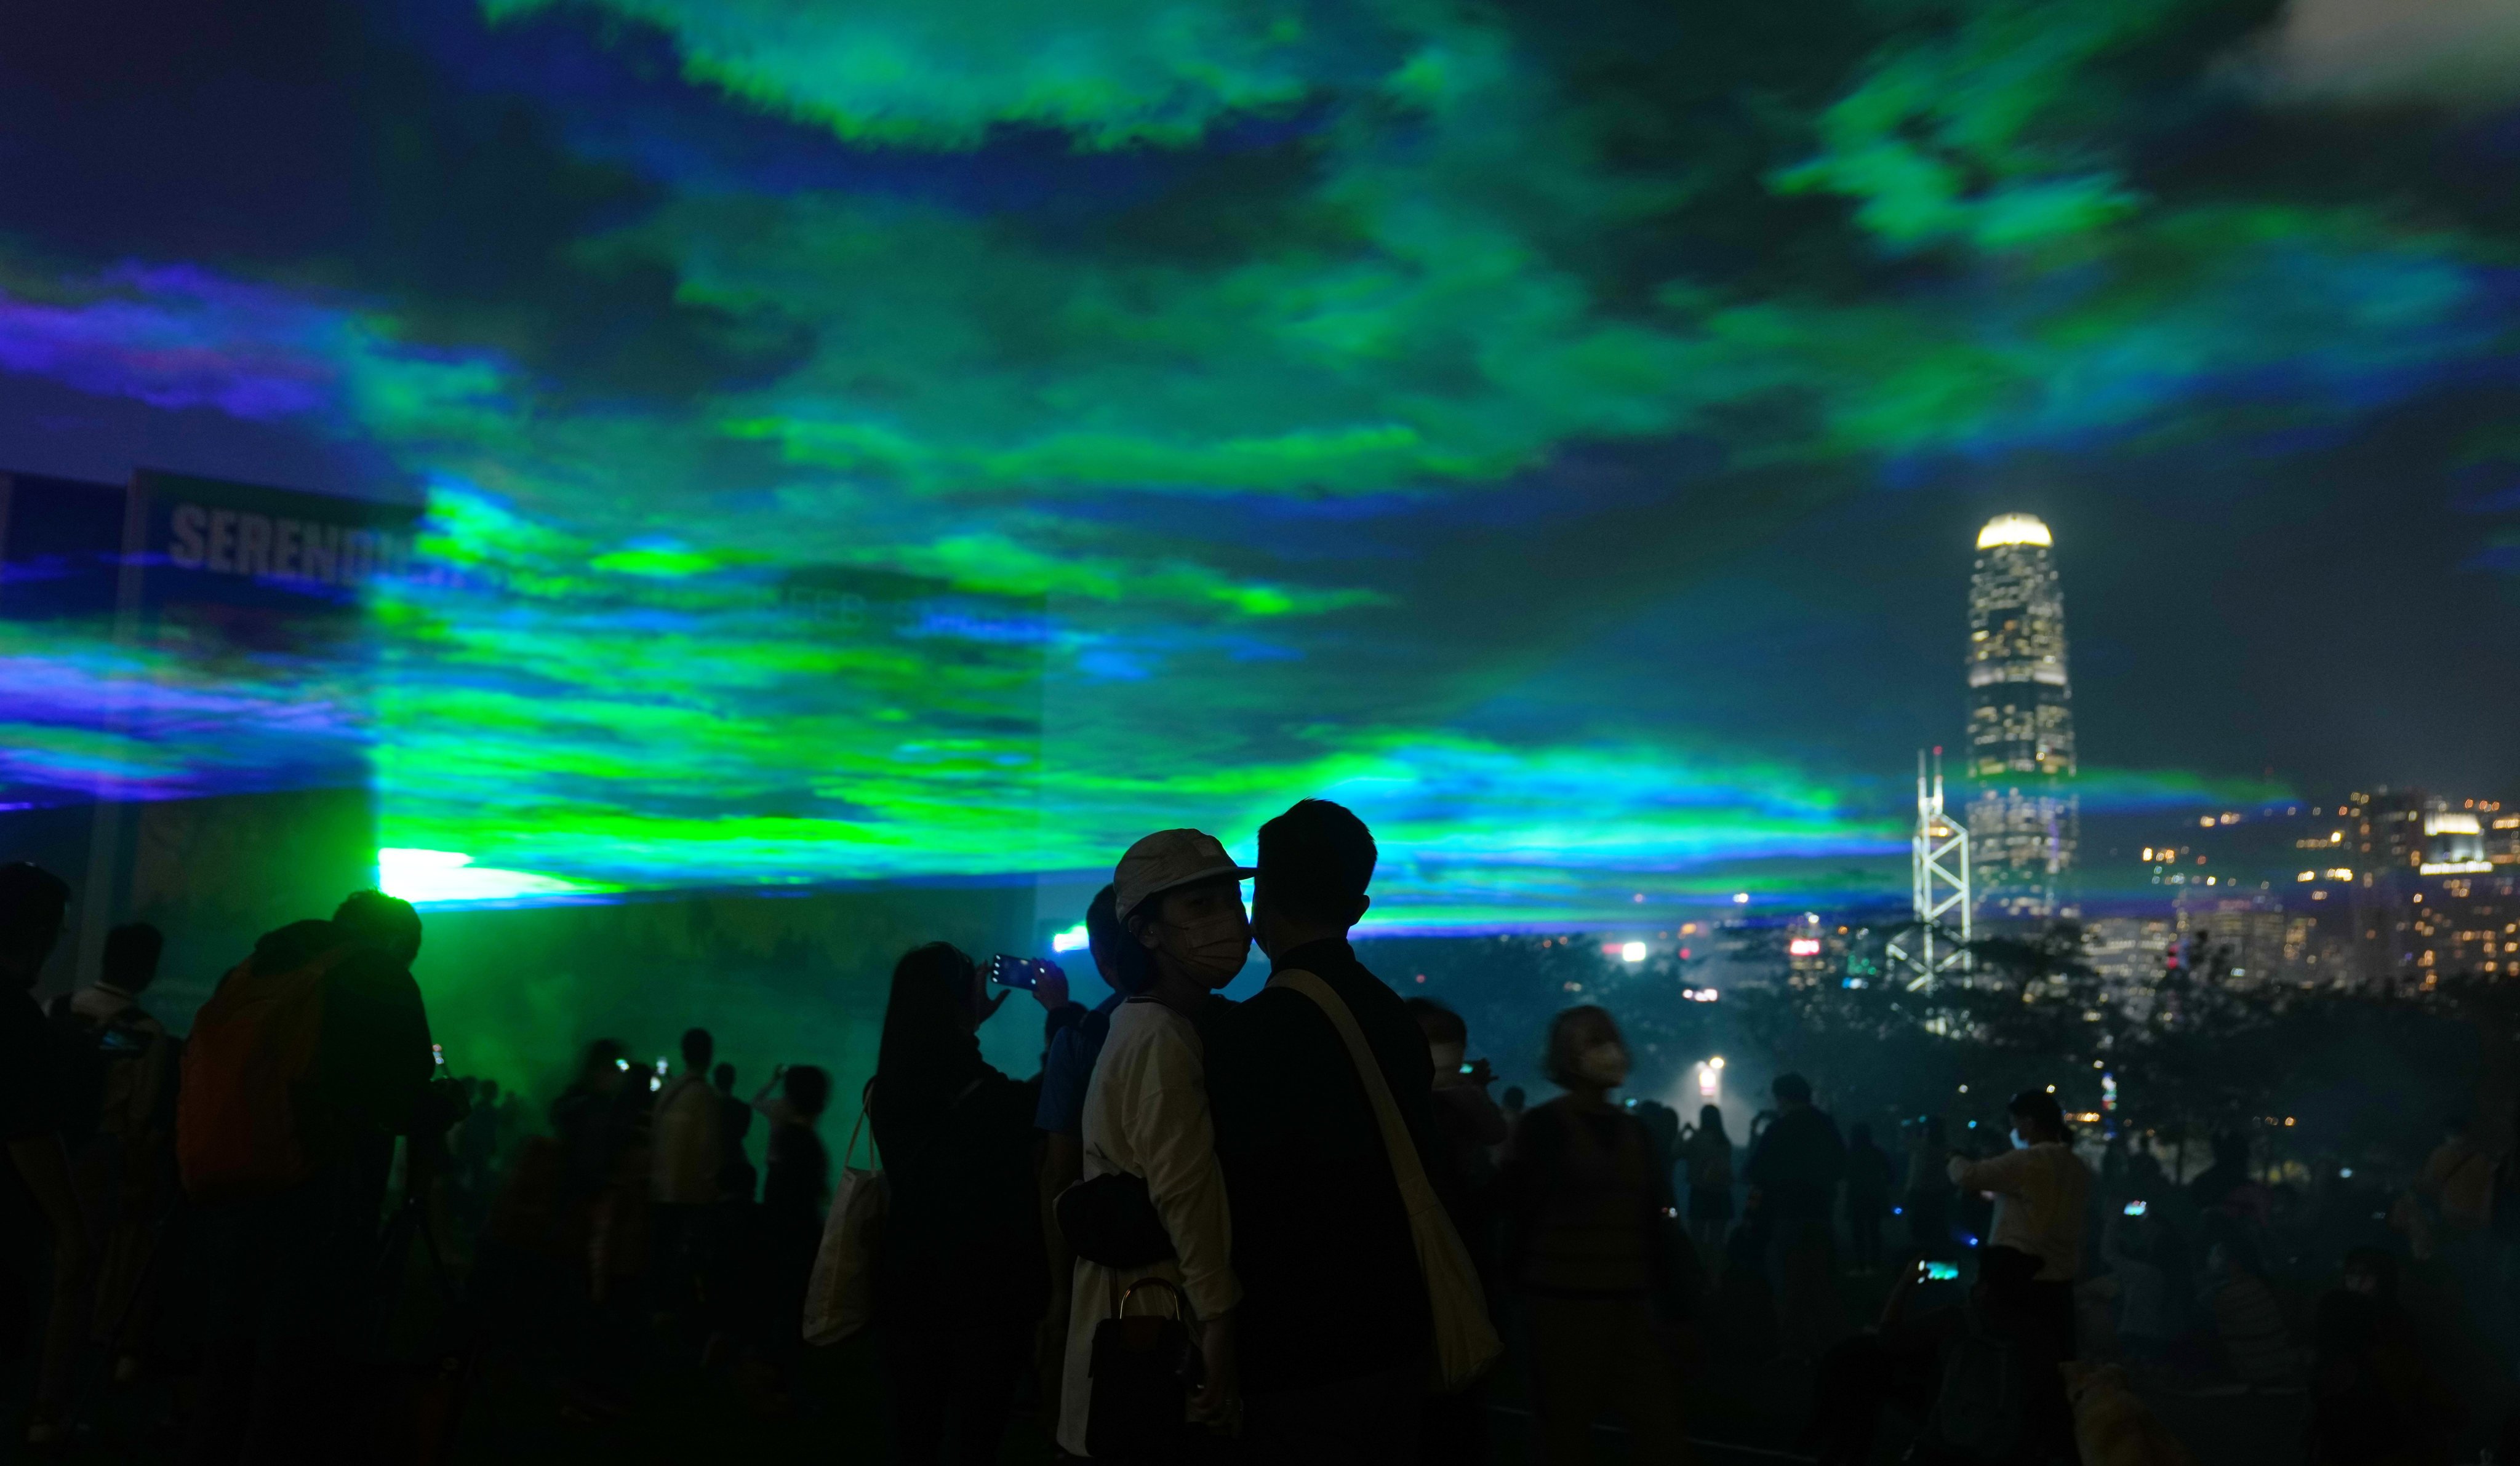 Borealis, an outdoor art installation by  Swiss artist Dan Acher, has its premiere in the West Kowloon Cultural District on Monday. Photo: Sam Tsang